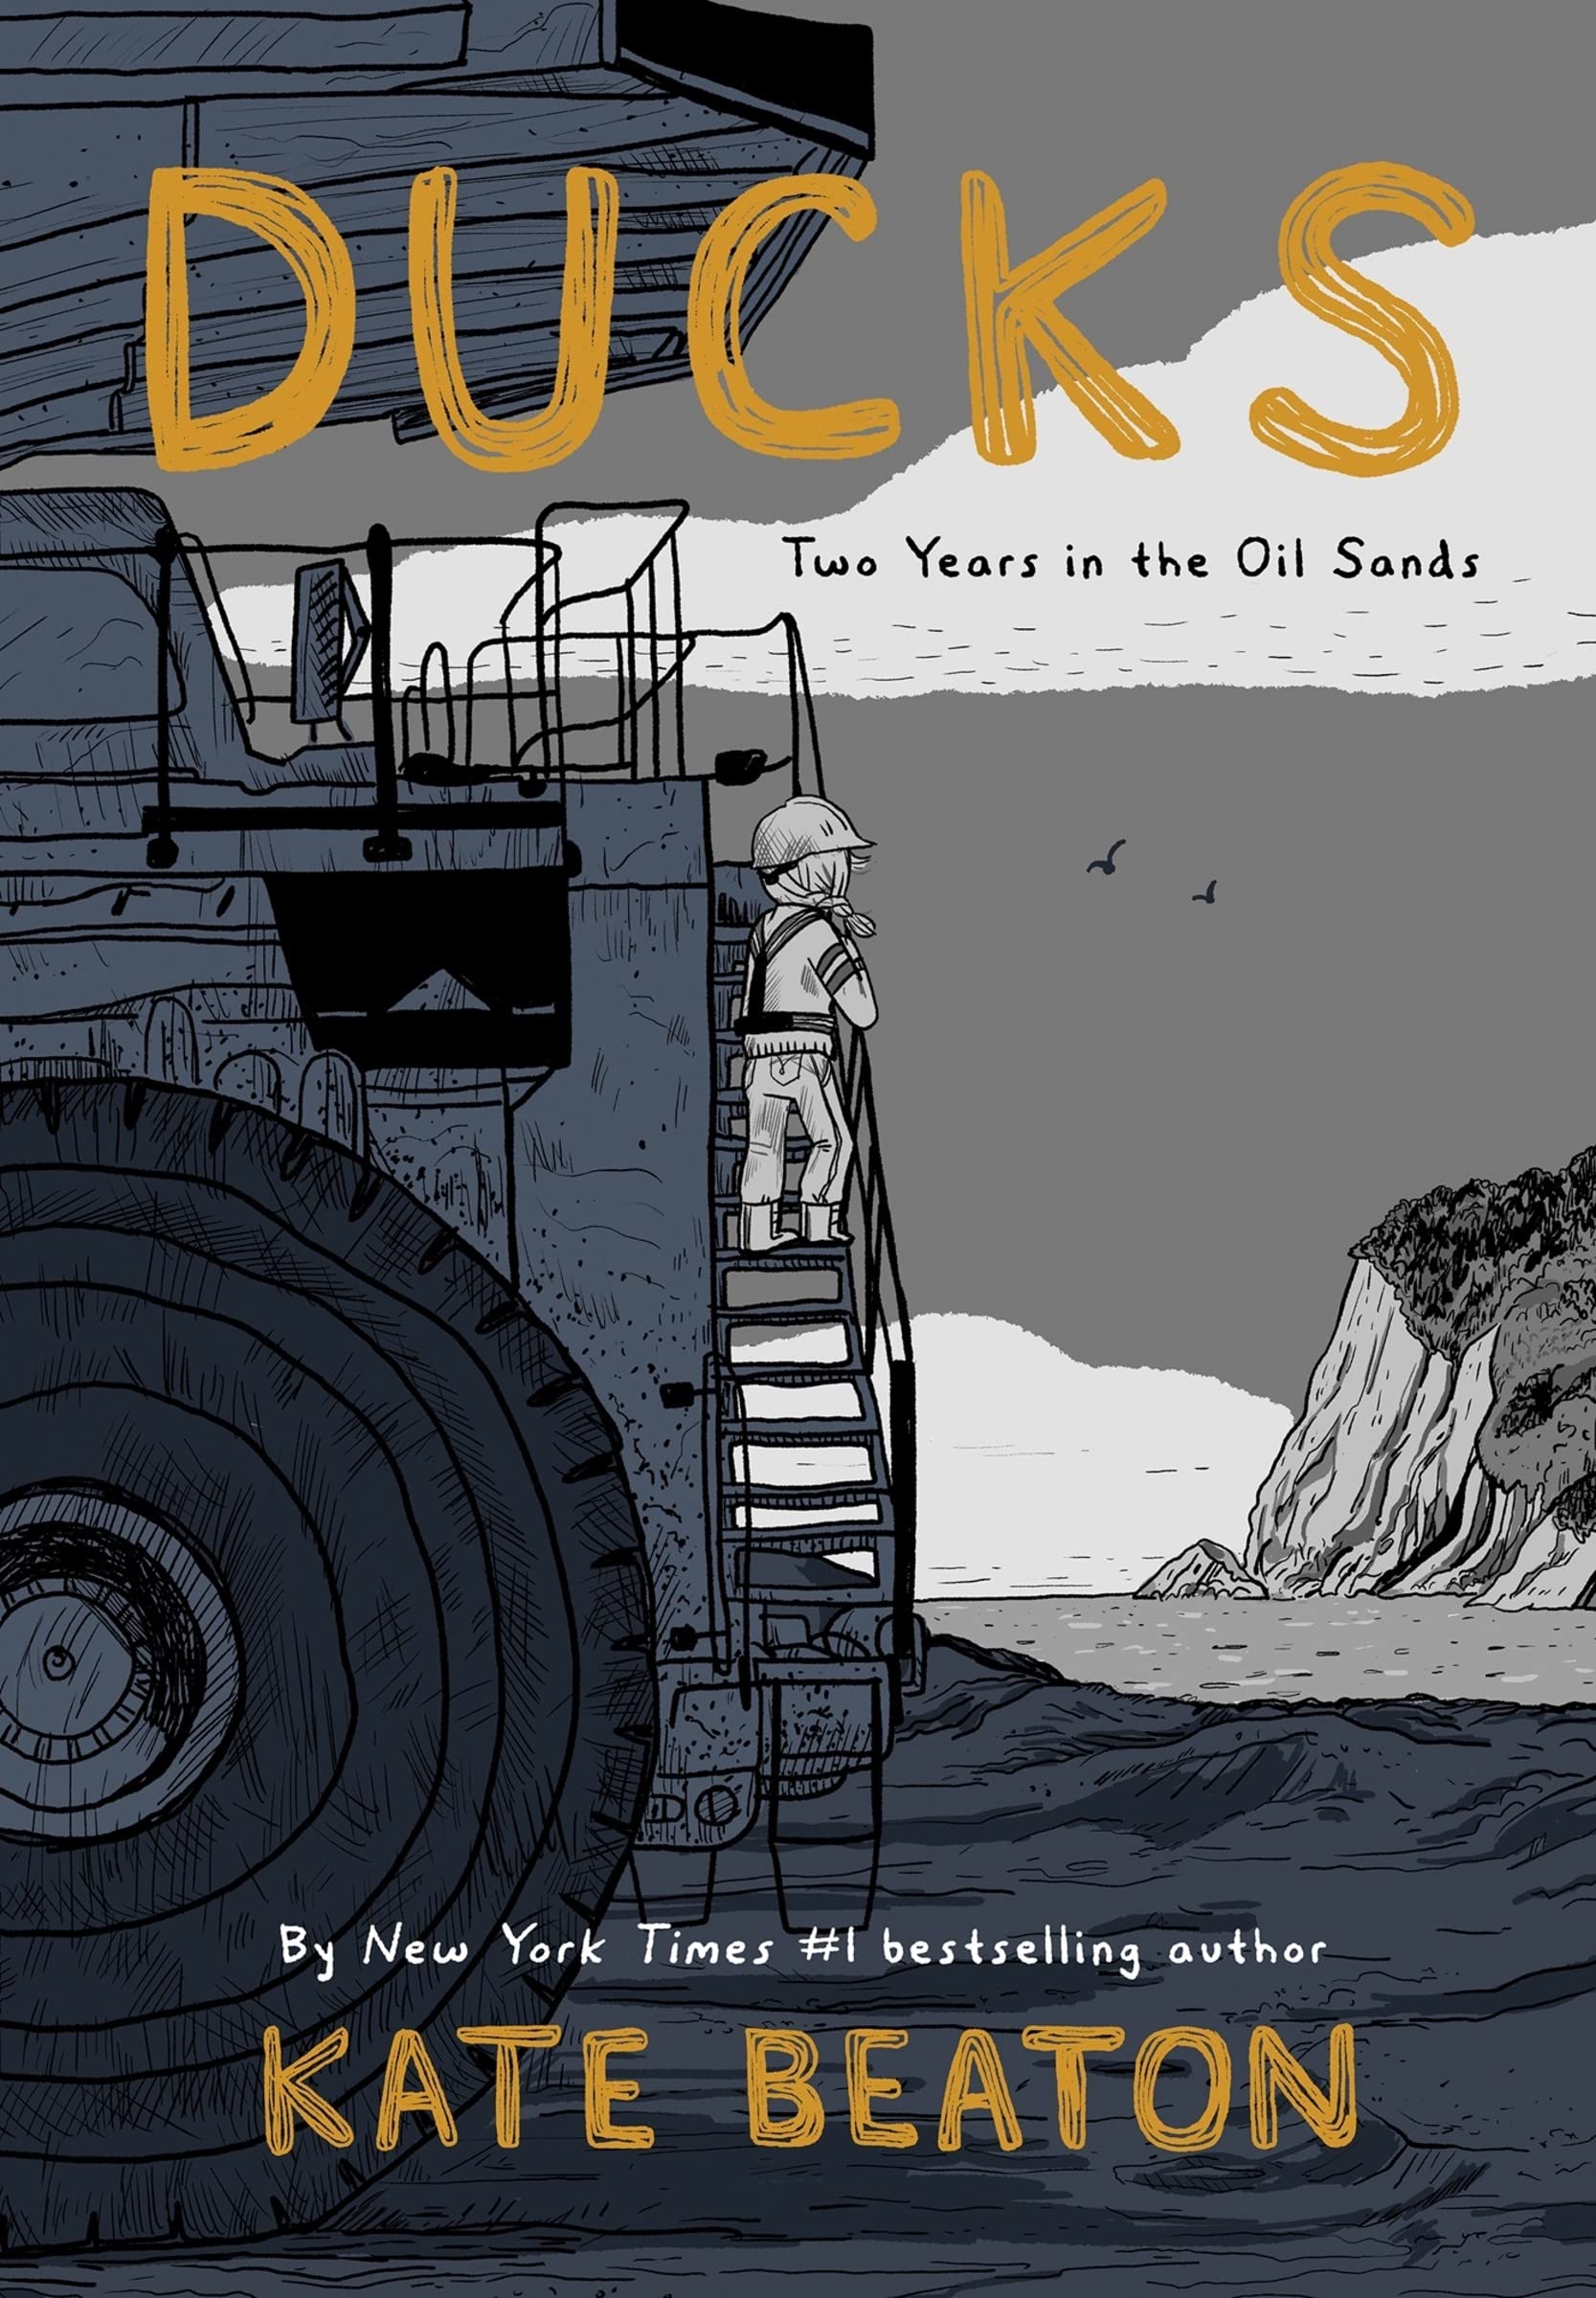 A graphic of the cover of Ducks: Two Years in the Oil Sands by Kate Beaton